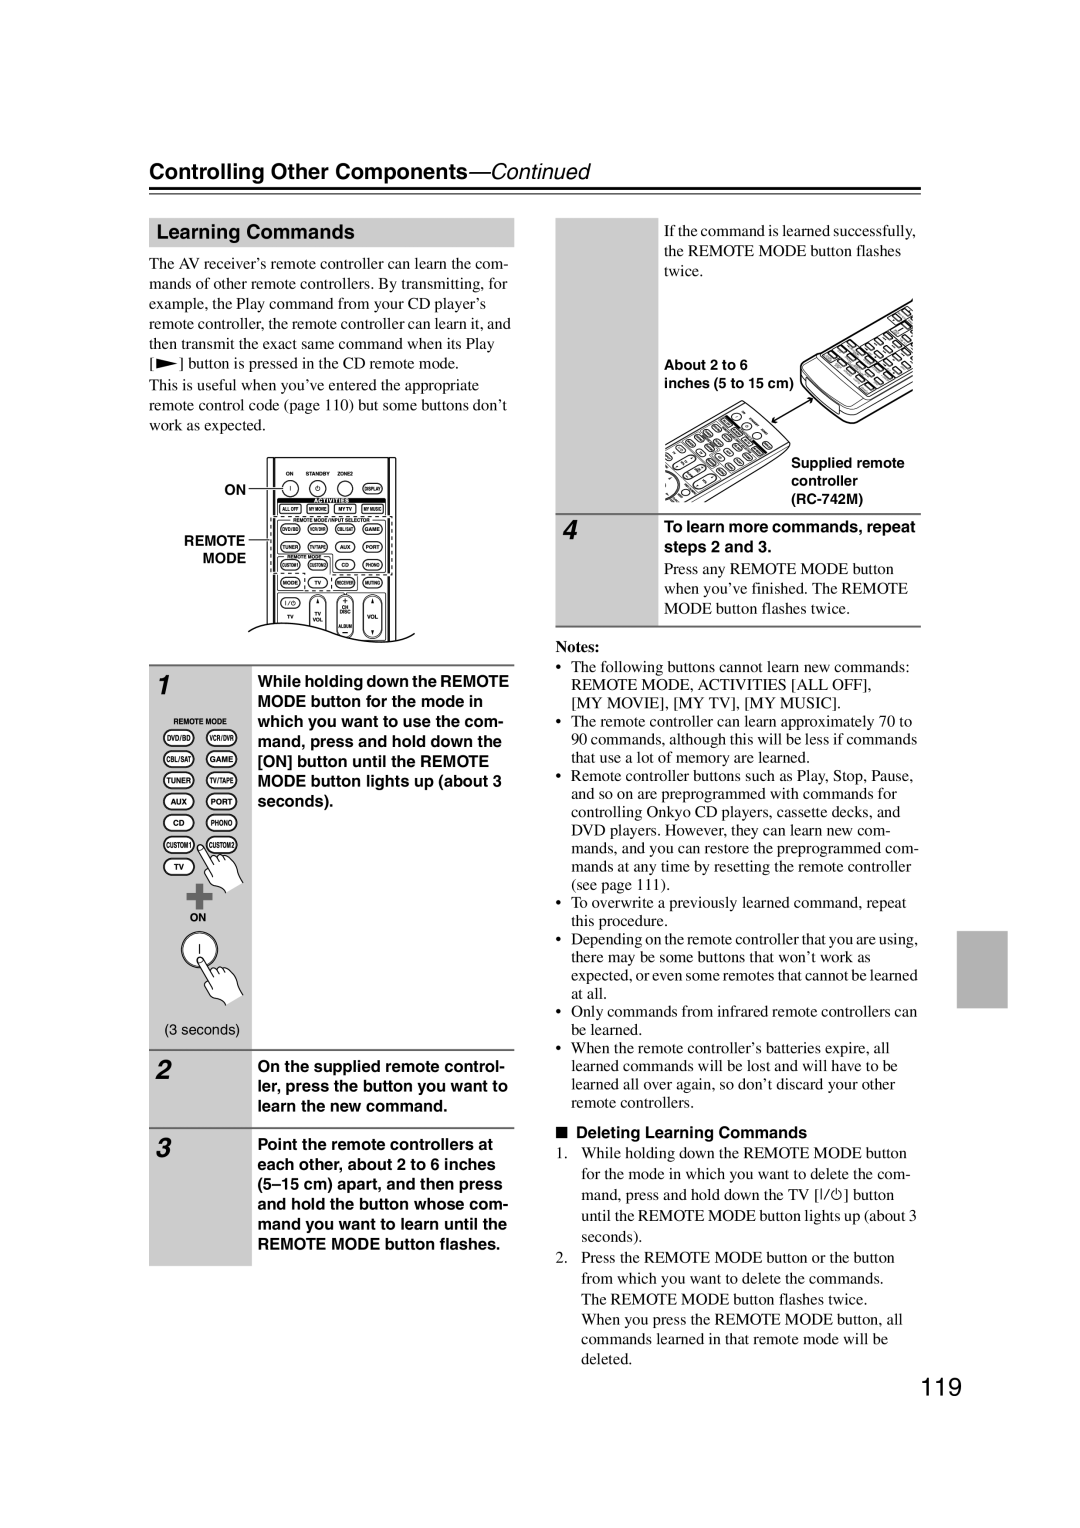 Onkyo TX-SR707 instruction manual Learning Commands, Controlling Other Components—Continued, Notes 